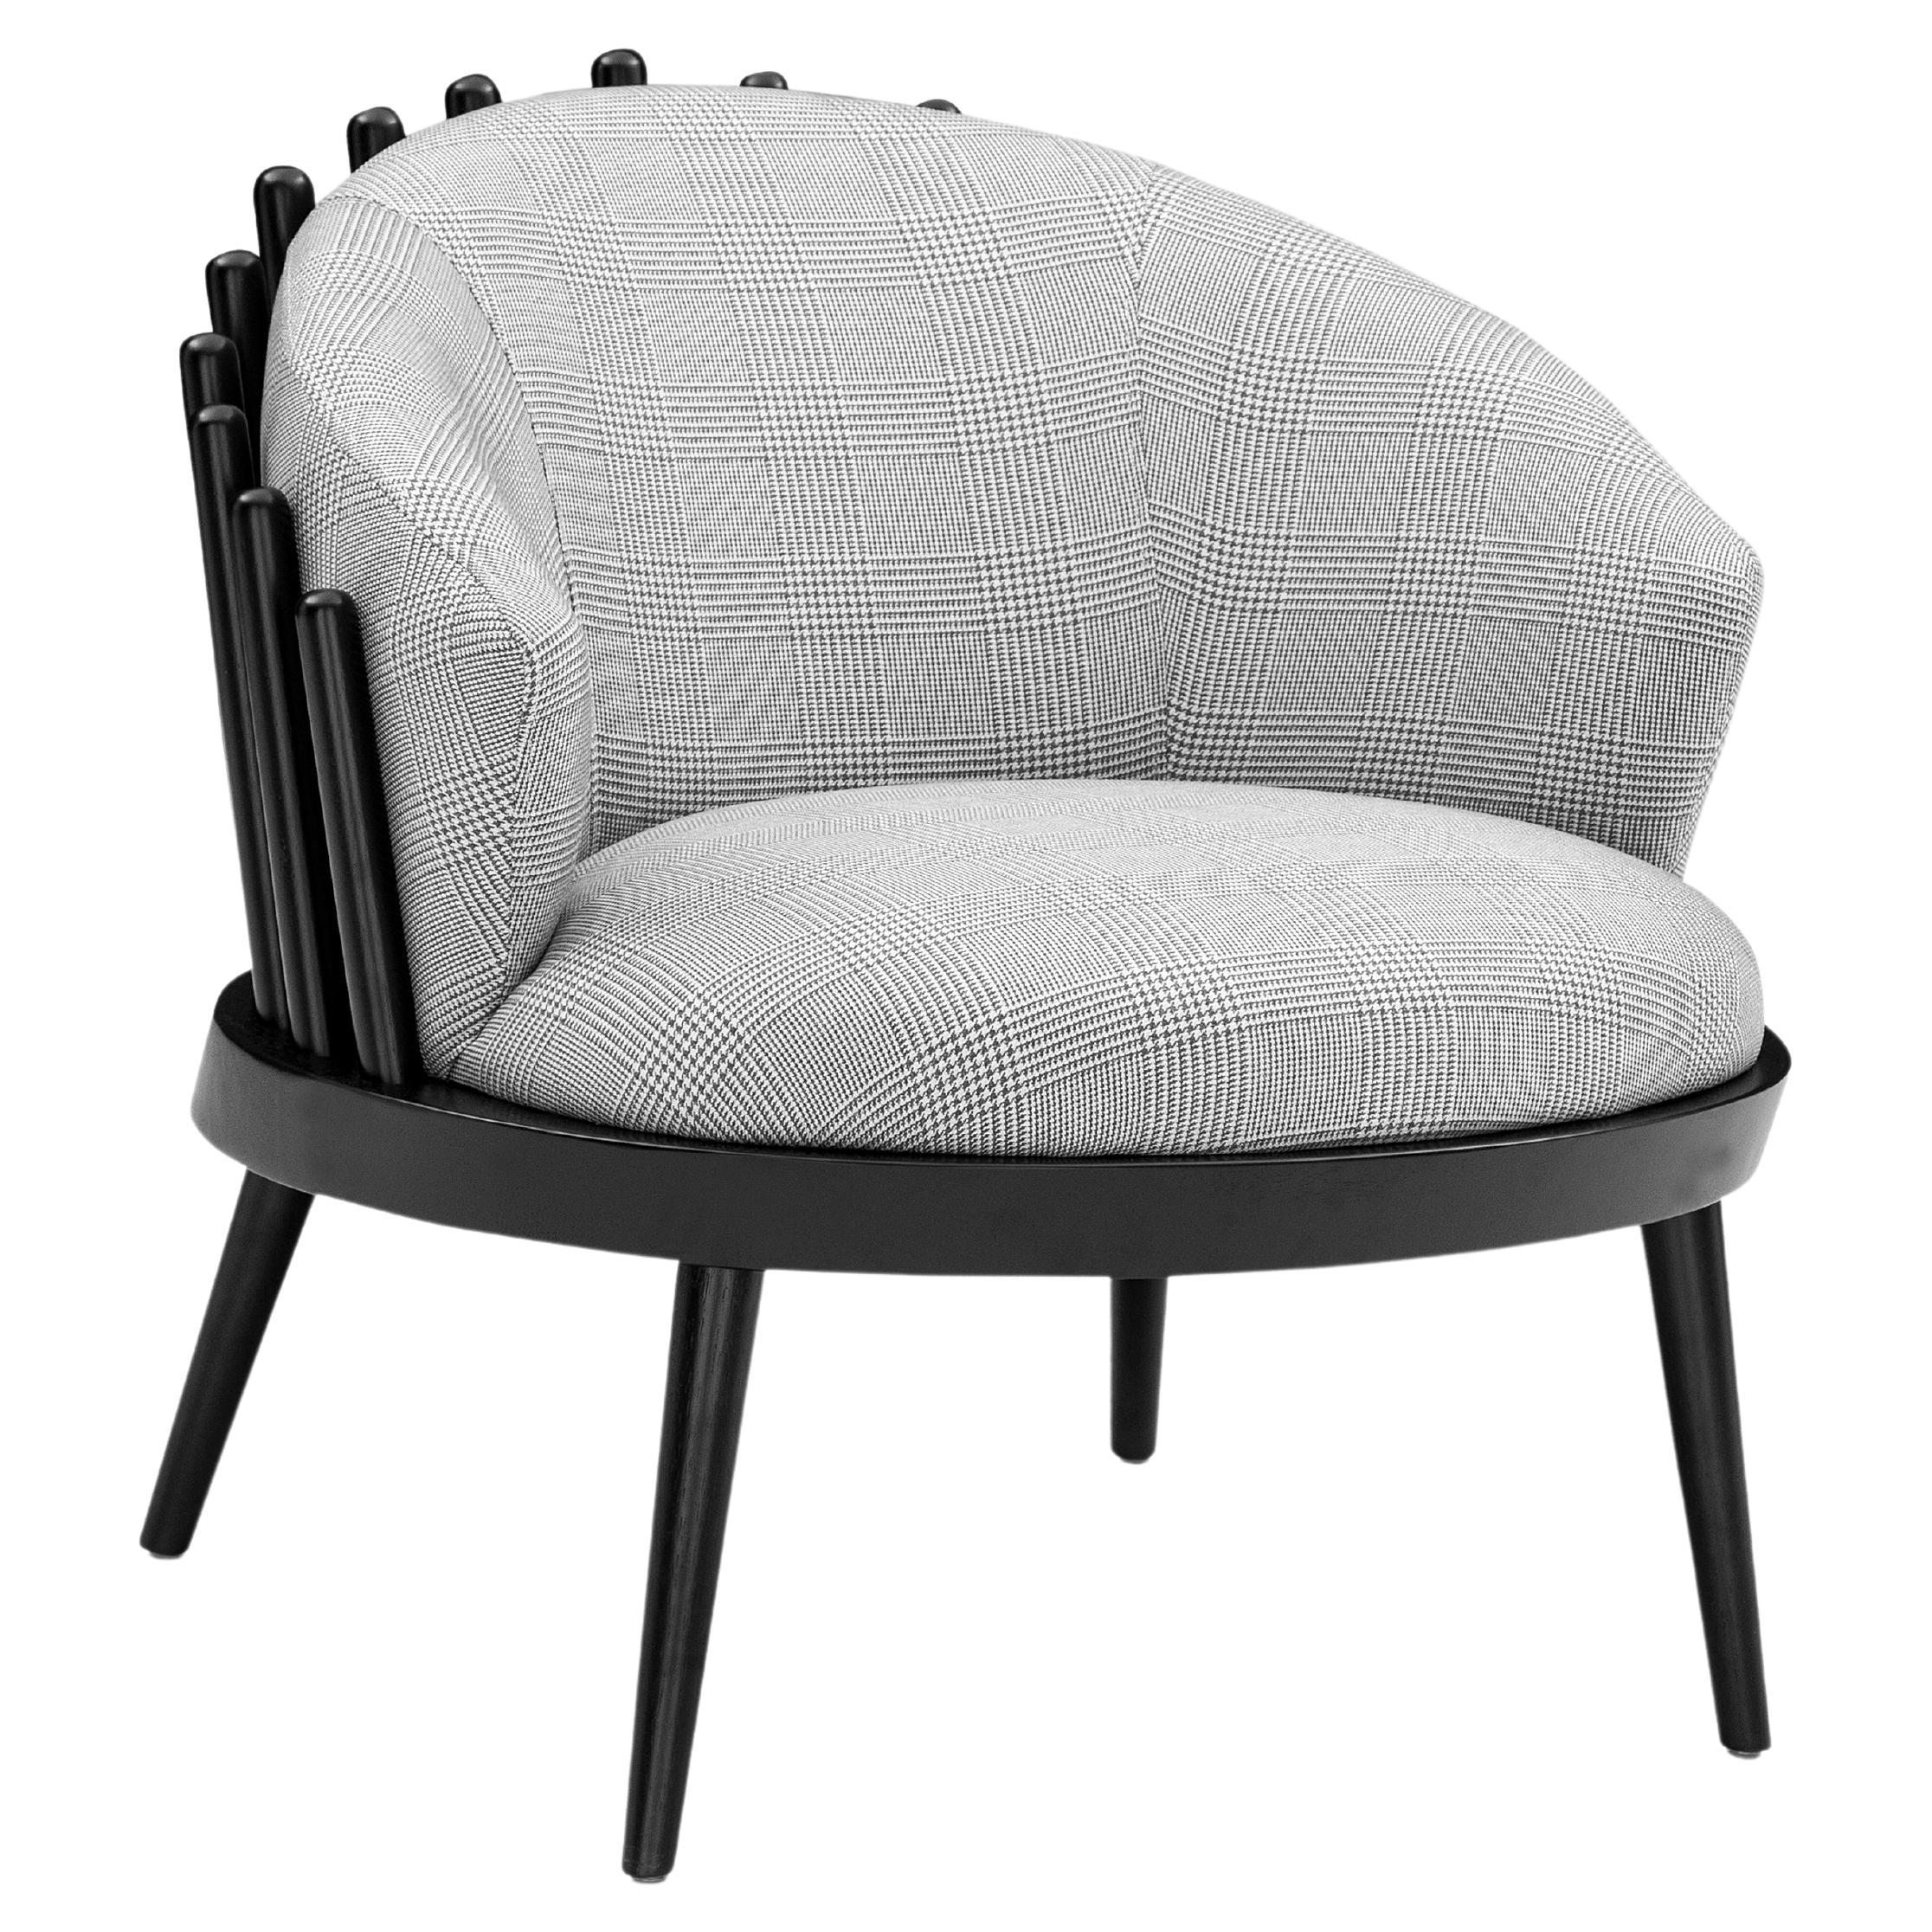 Fane Upholstered Armchair in Black Wood Finish and Plaid Fabric For Sale